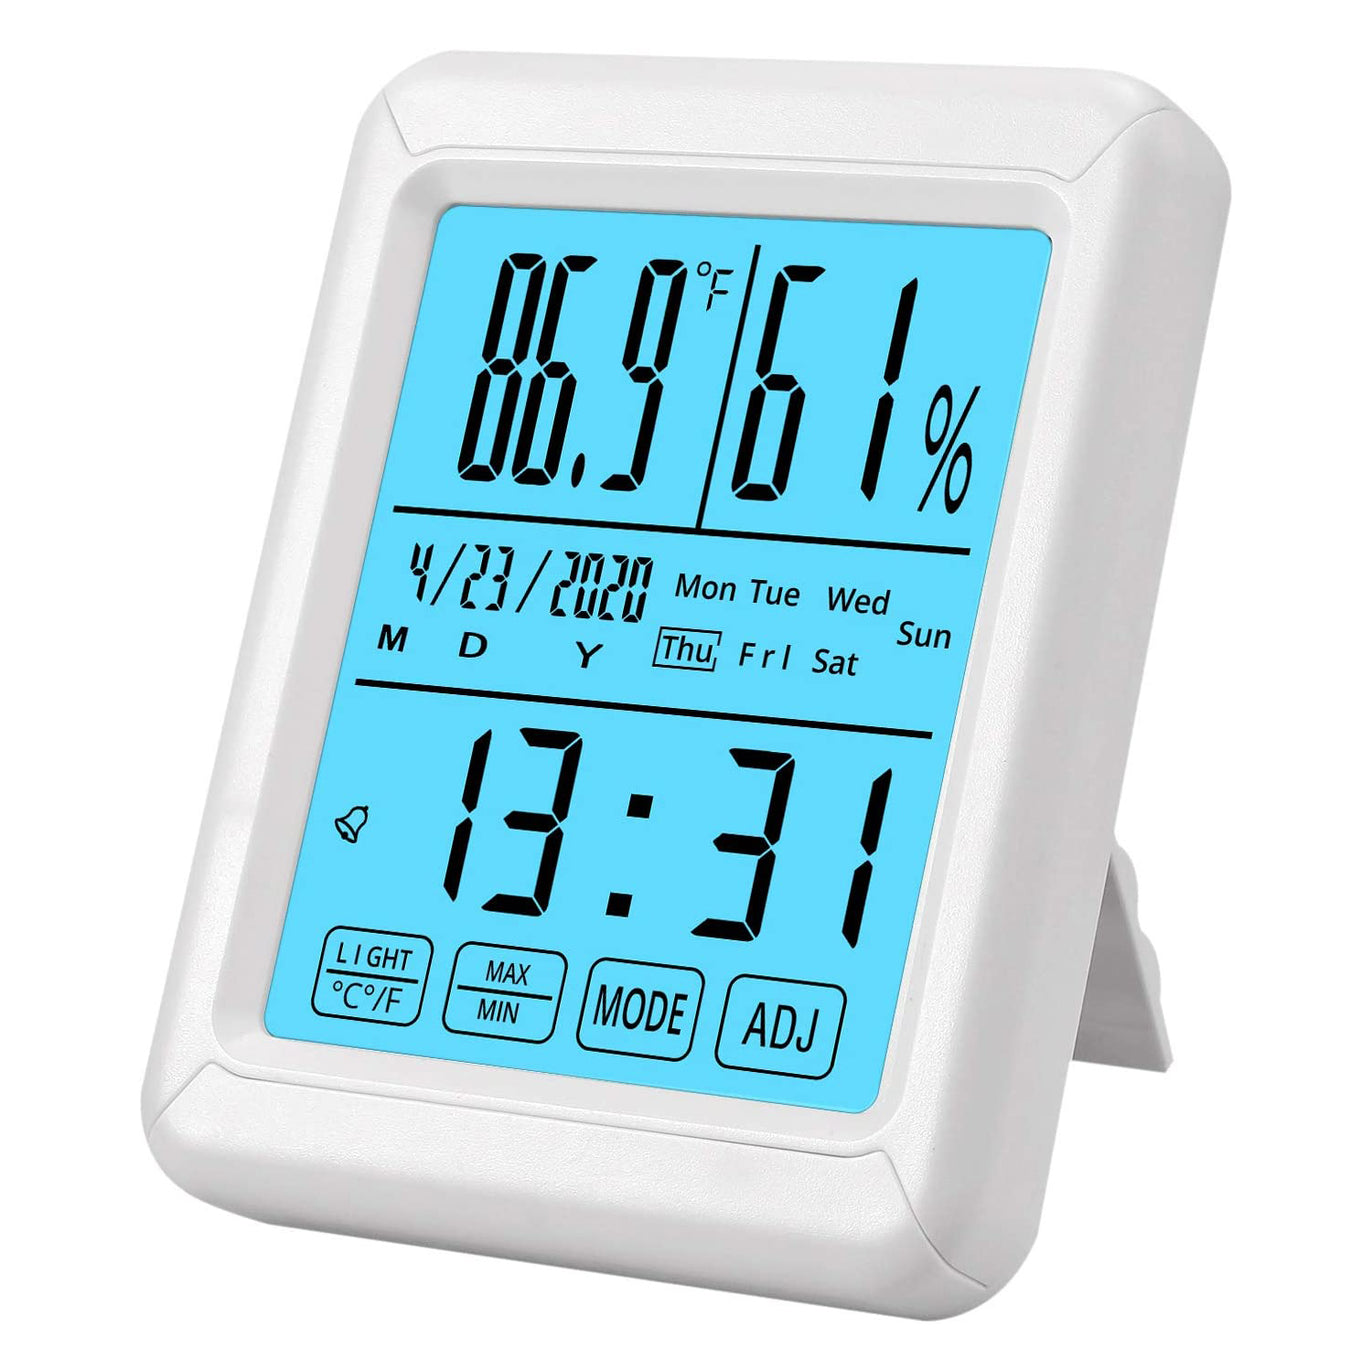 eSynic Touch Screen Backlight Touchable Digital Hygrometer Thermometer